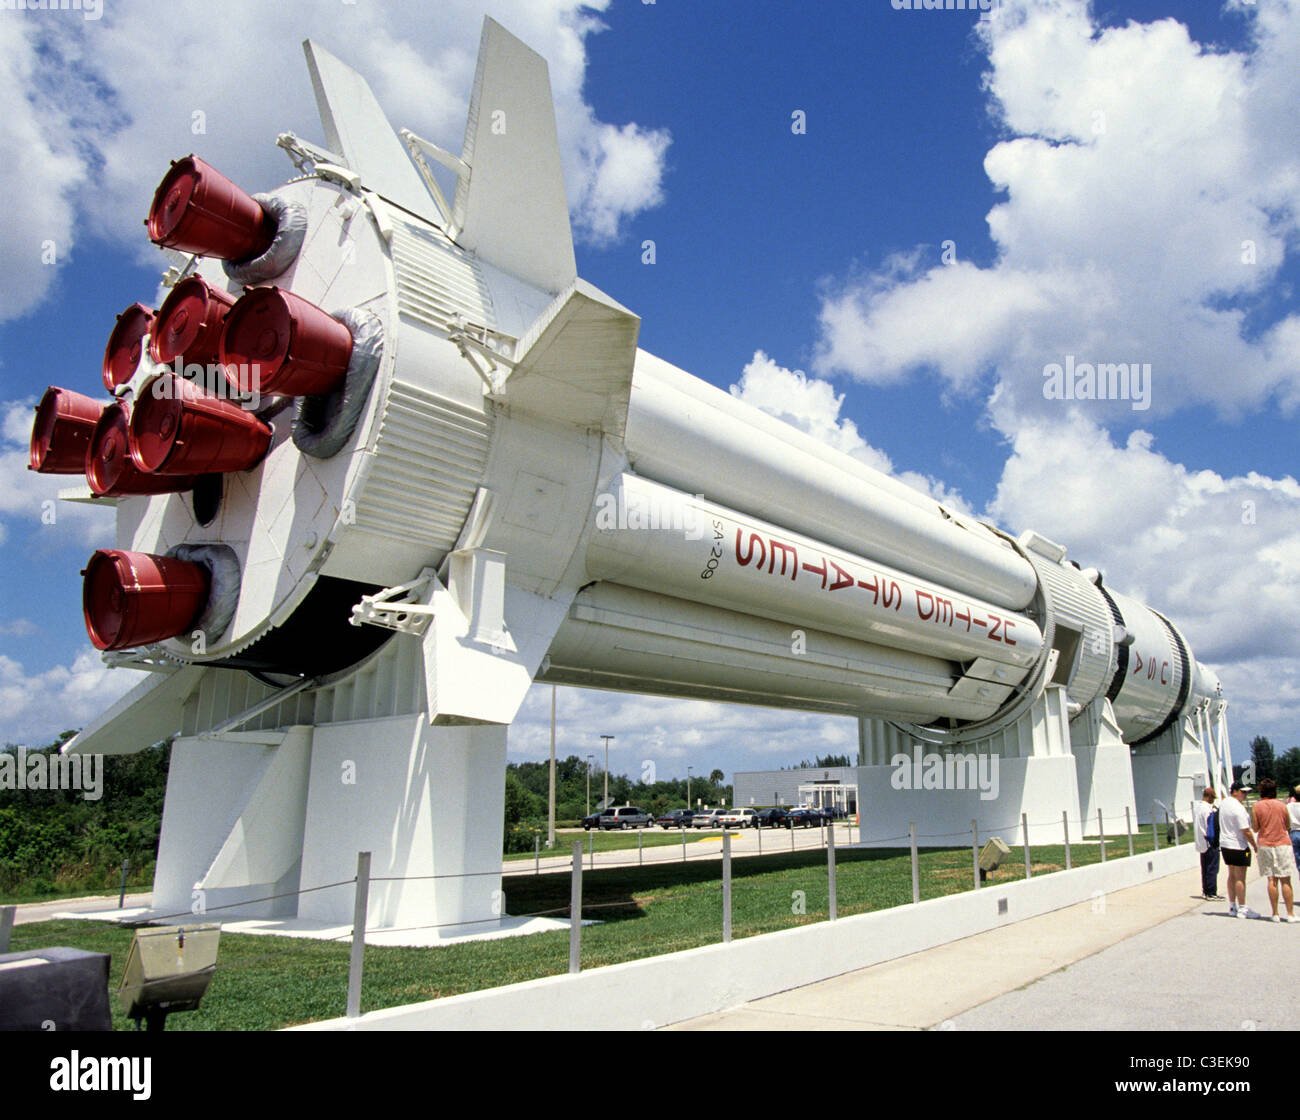 A Saturn 1B rocket in the NASA Rocket Garden at the Kennedy Space Center Centre in Florida Stock Photo